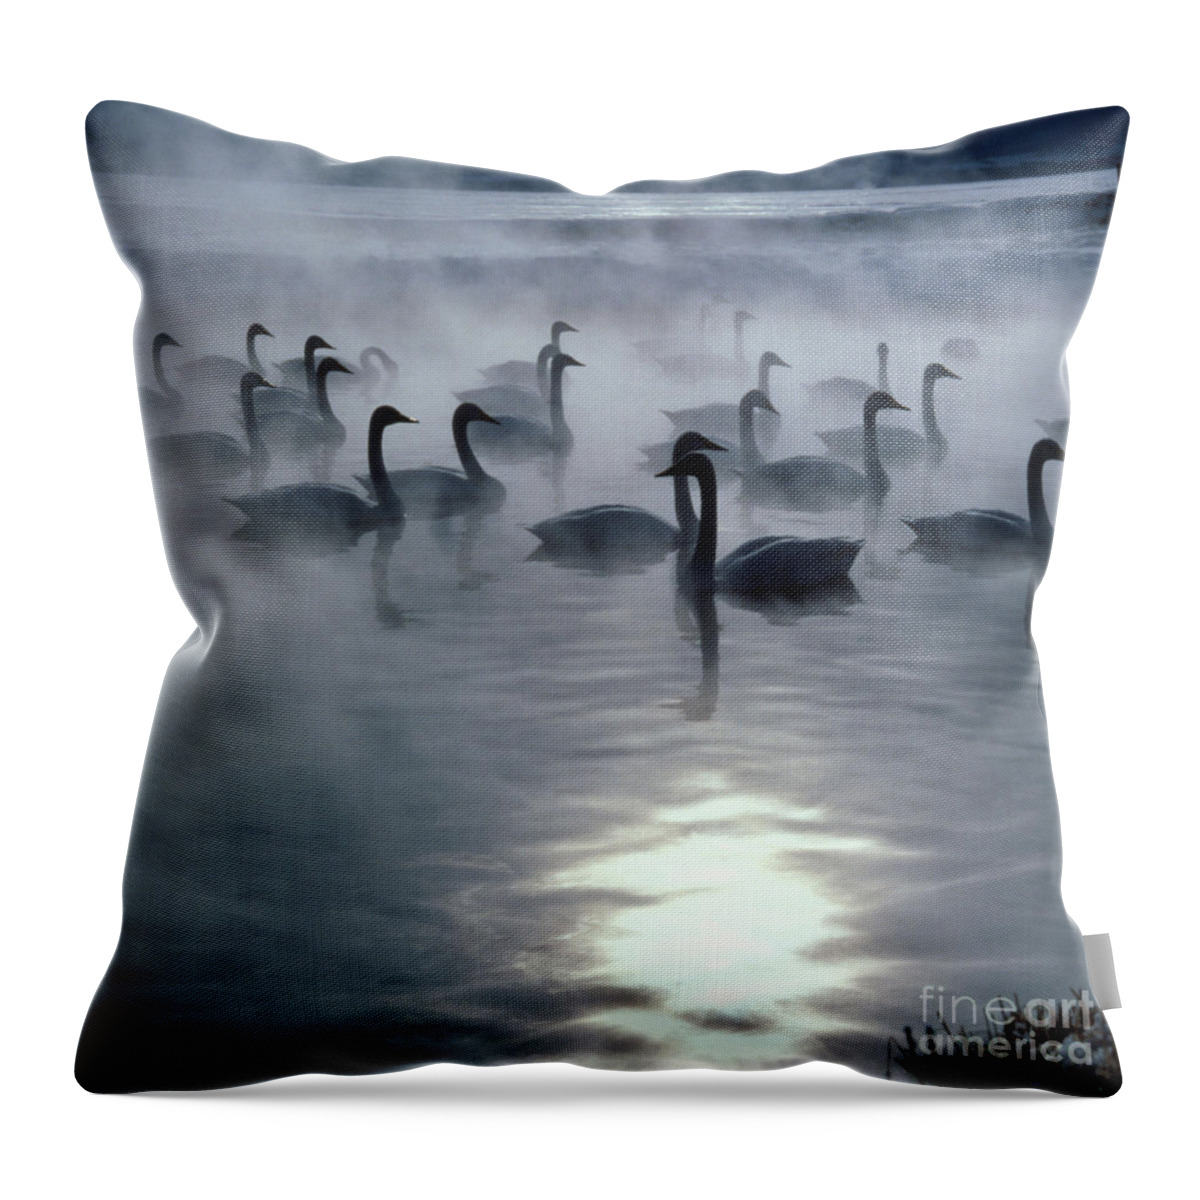 Whooper Swan Throw Pillow featuring the photograph Whooper Swans by Teiji Saga and Photo Researchers